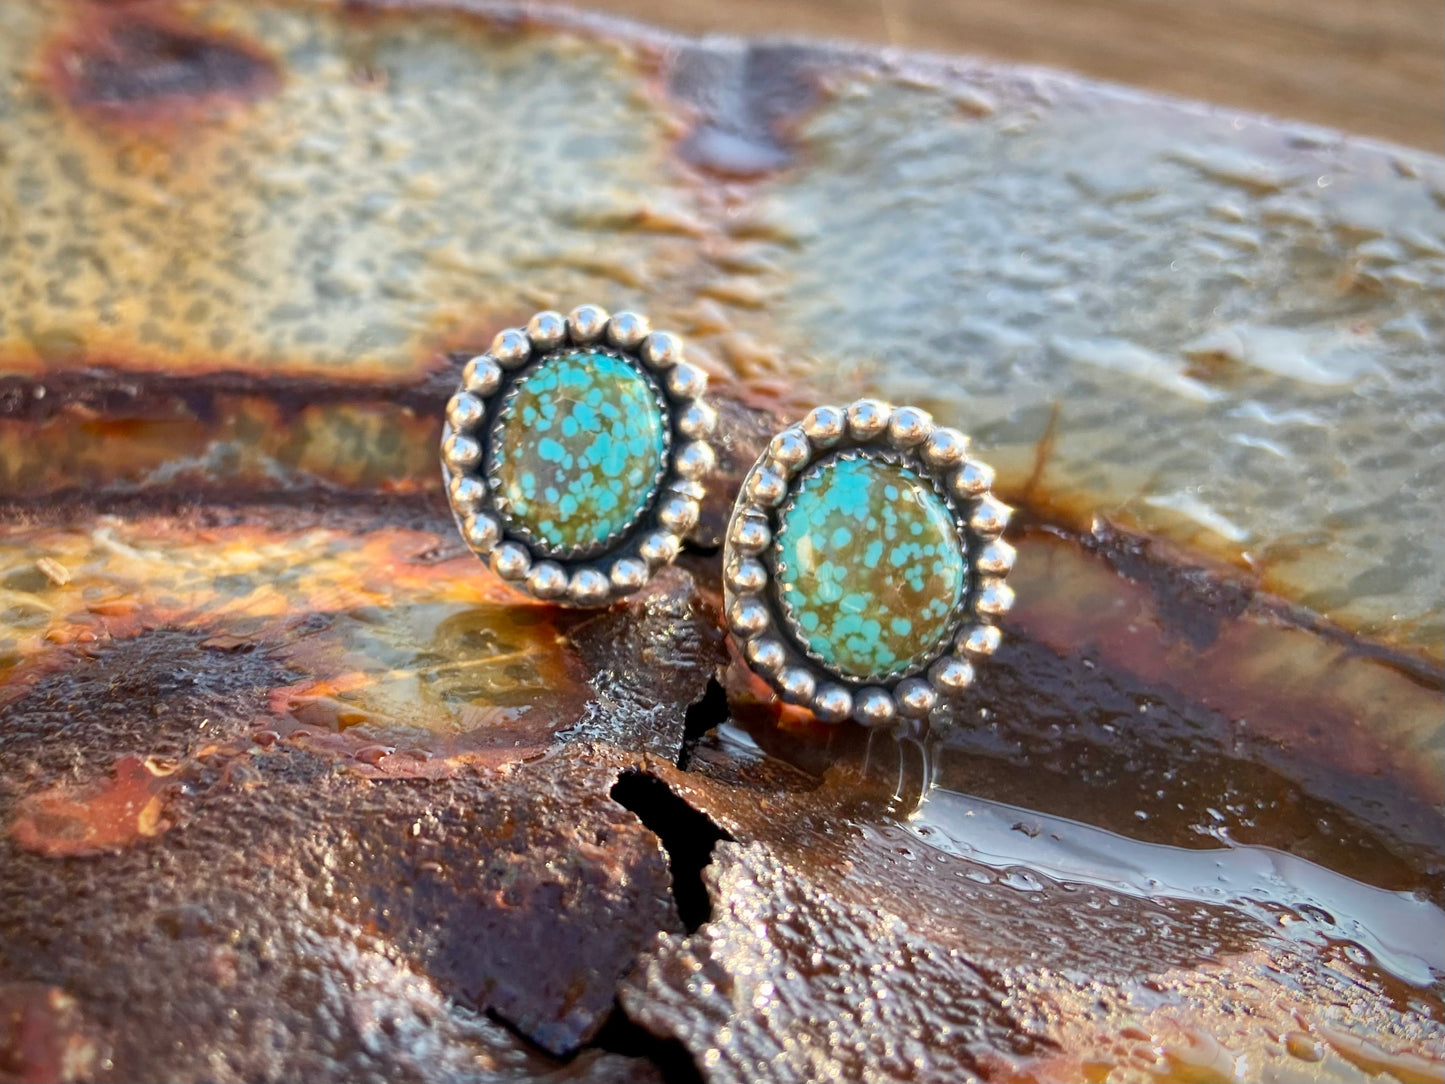 Mexican Turquoise Earrings